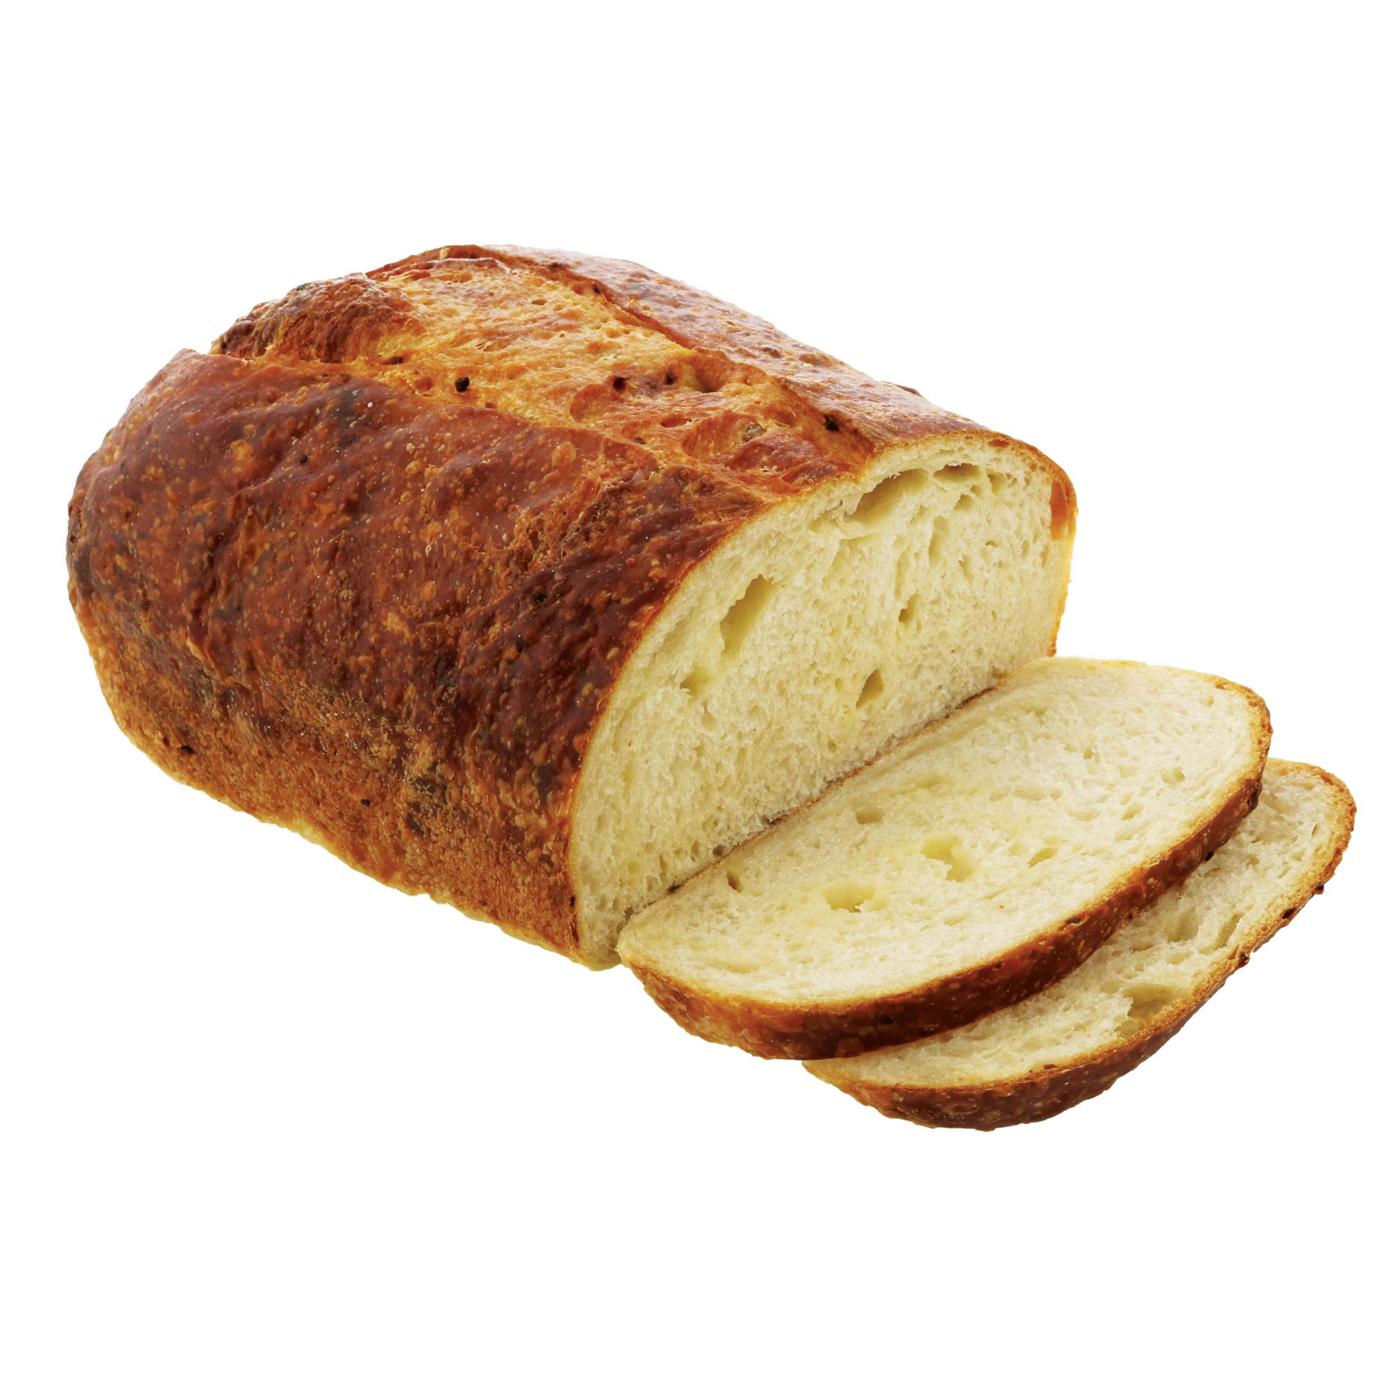 H-E-B Bakery Scratch Aged Cheddar Onion Bread; image 1 of 2